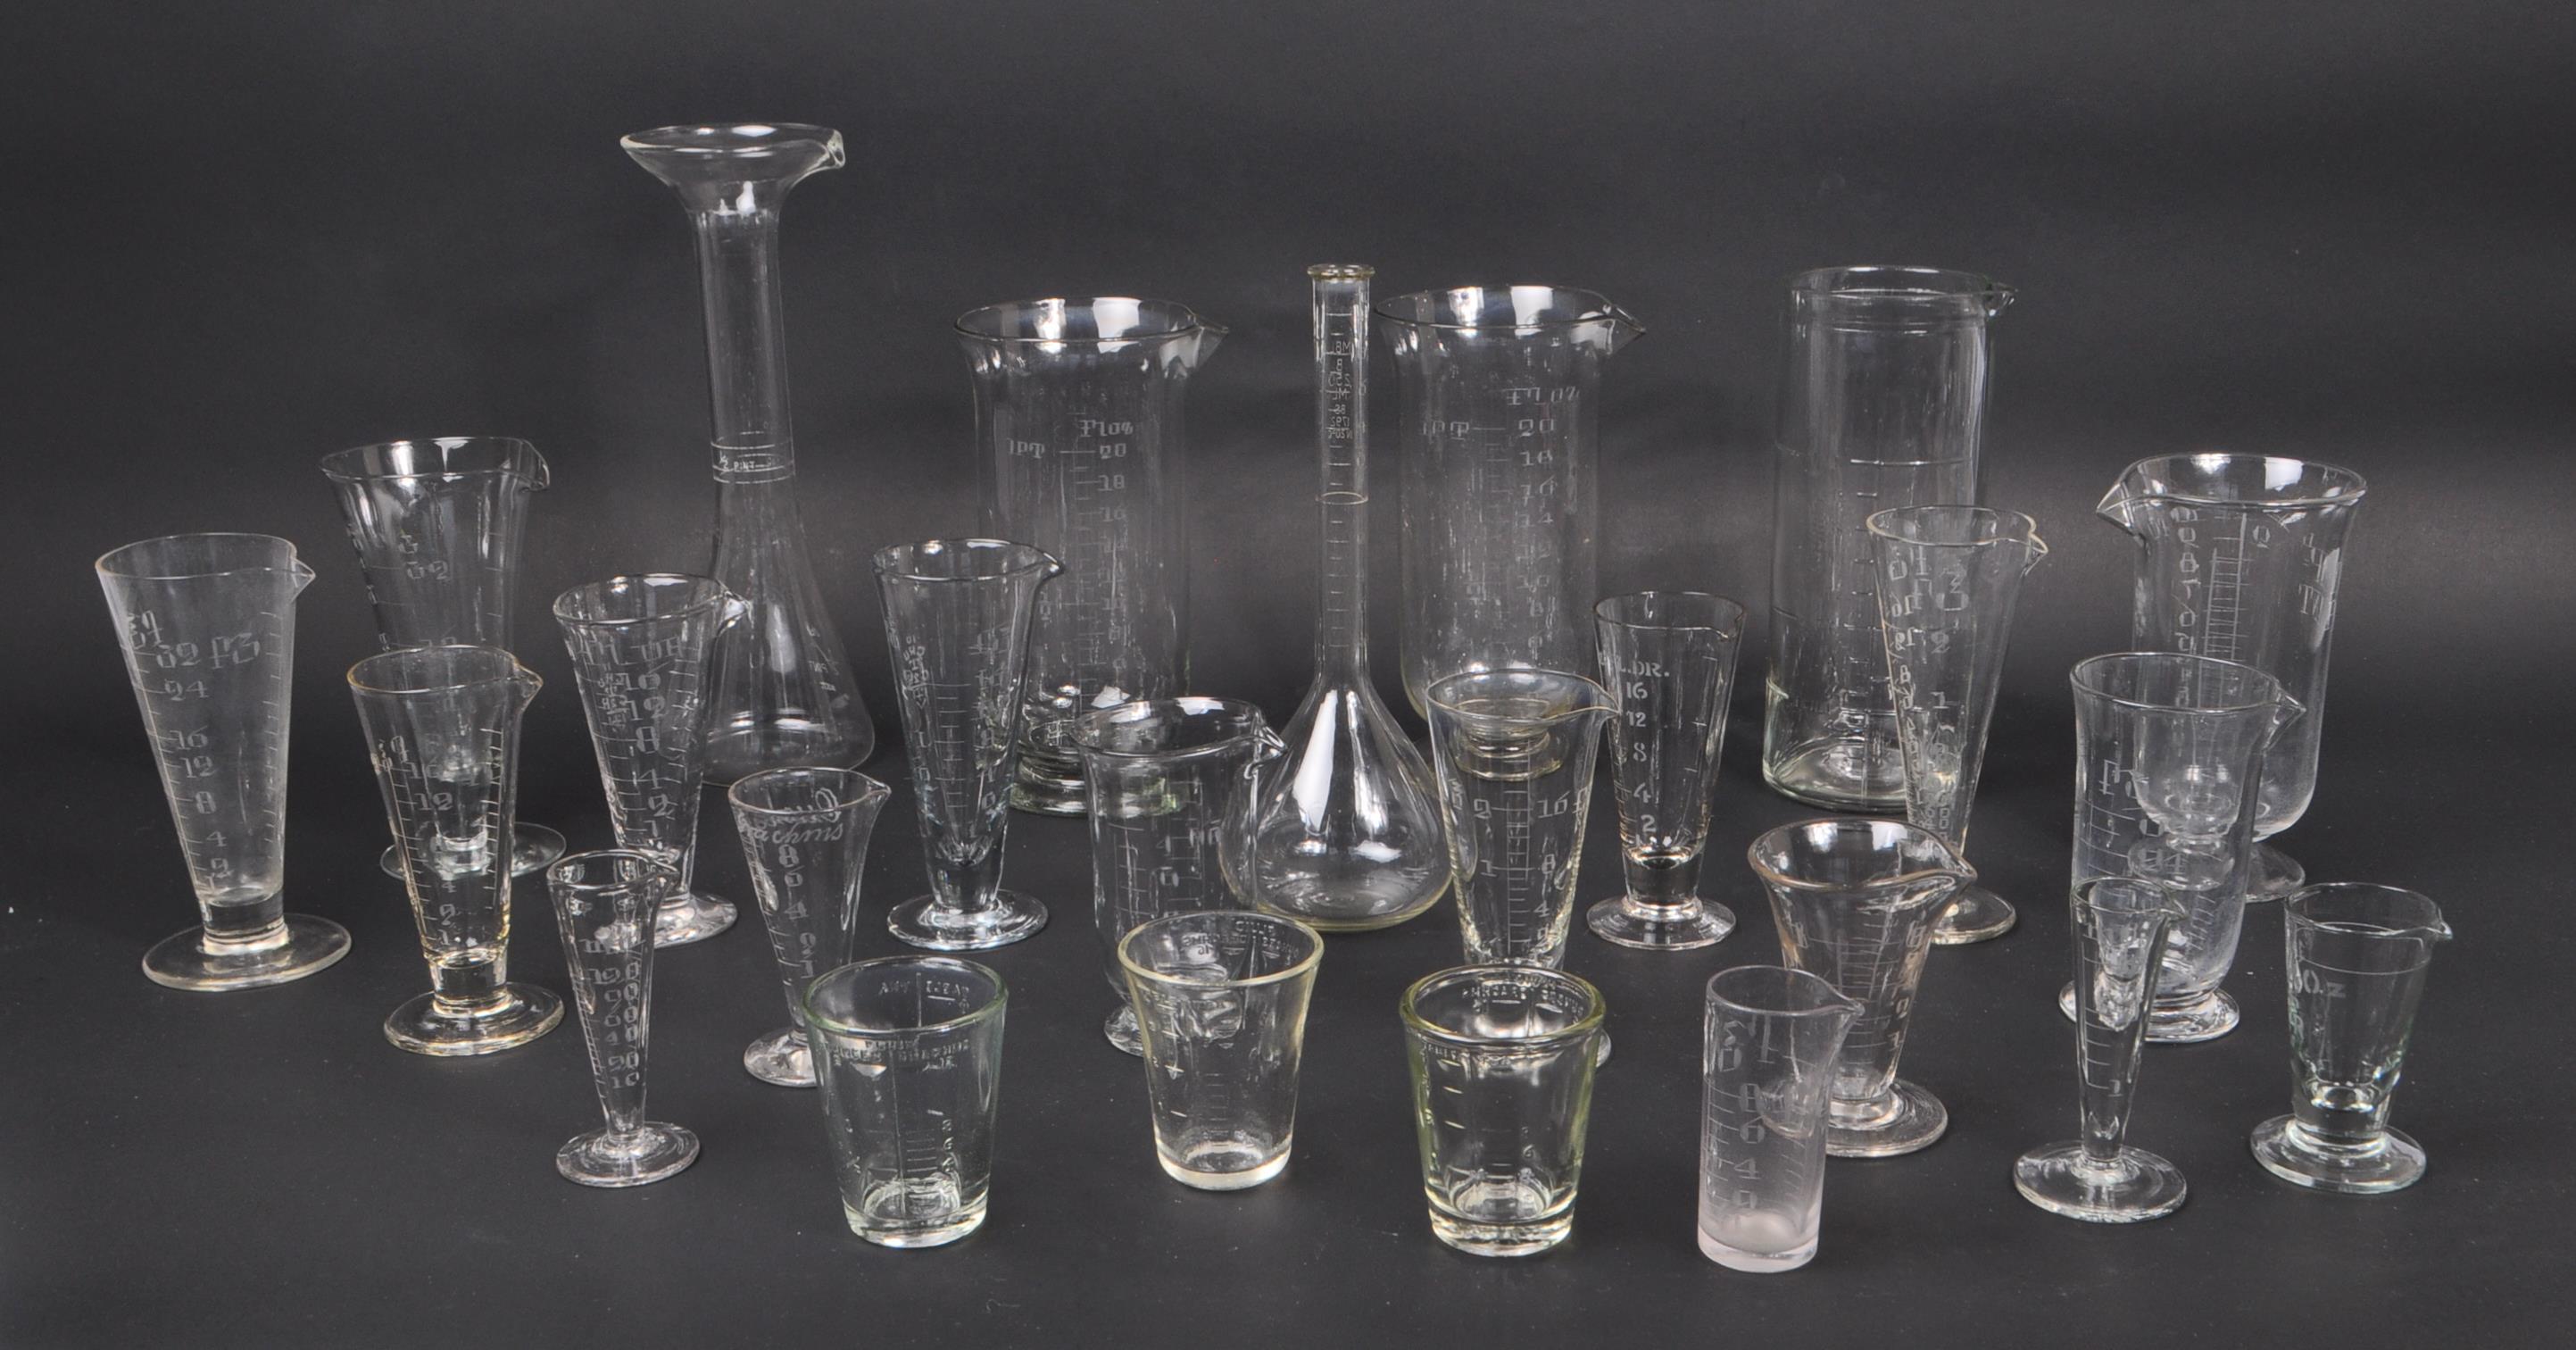 COLLECTION OF GLASS SCIENTIFIC CHEMICAL MEASURING EQUIPMENT